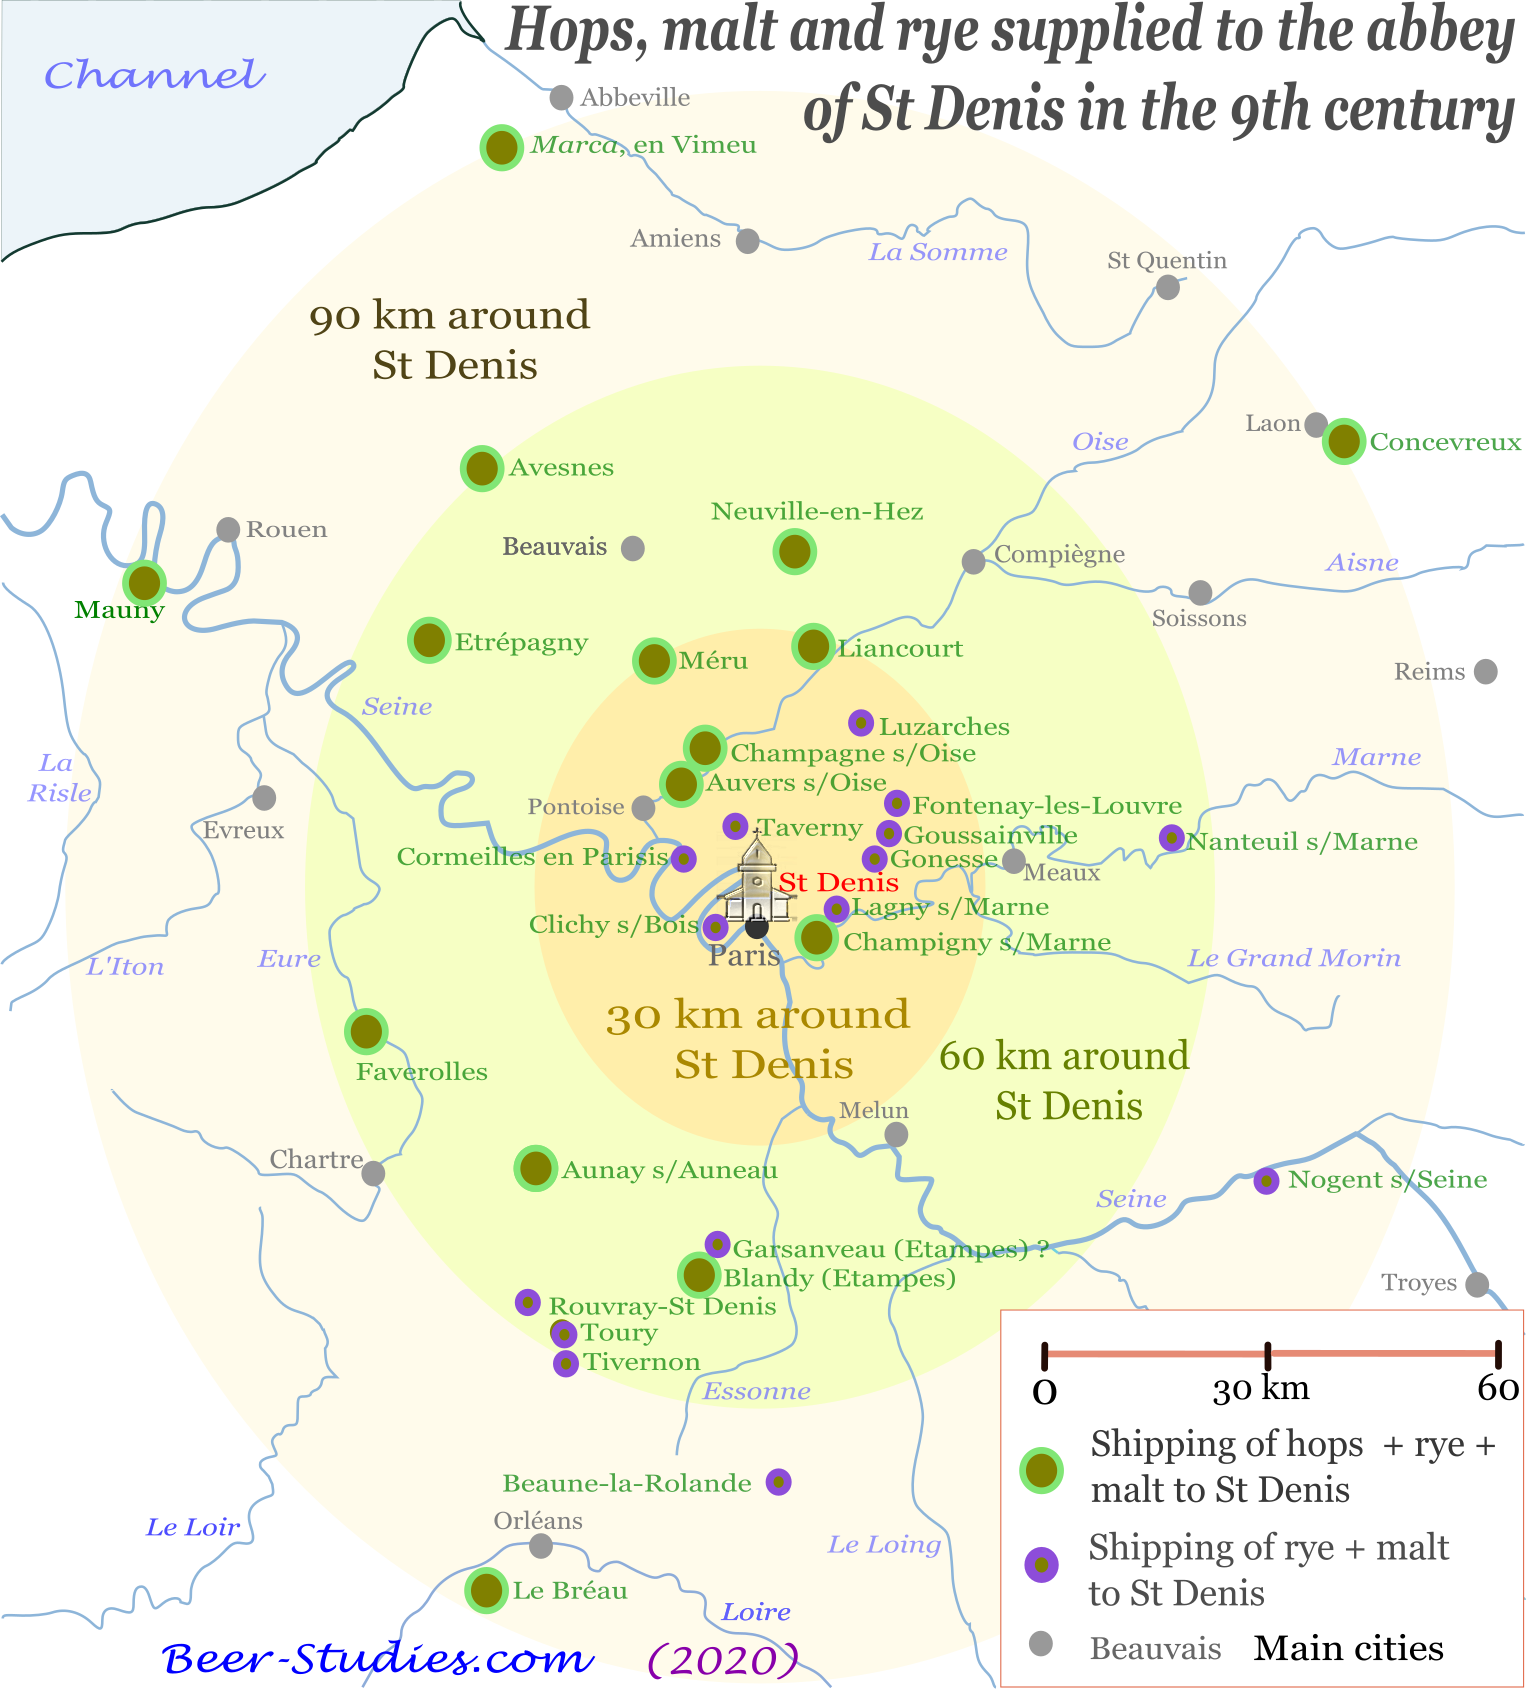 Estates of the abbey of St Denis (Paris) in 832. Royalties owed in rye, malt and hop. 